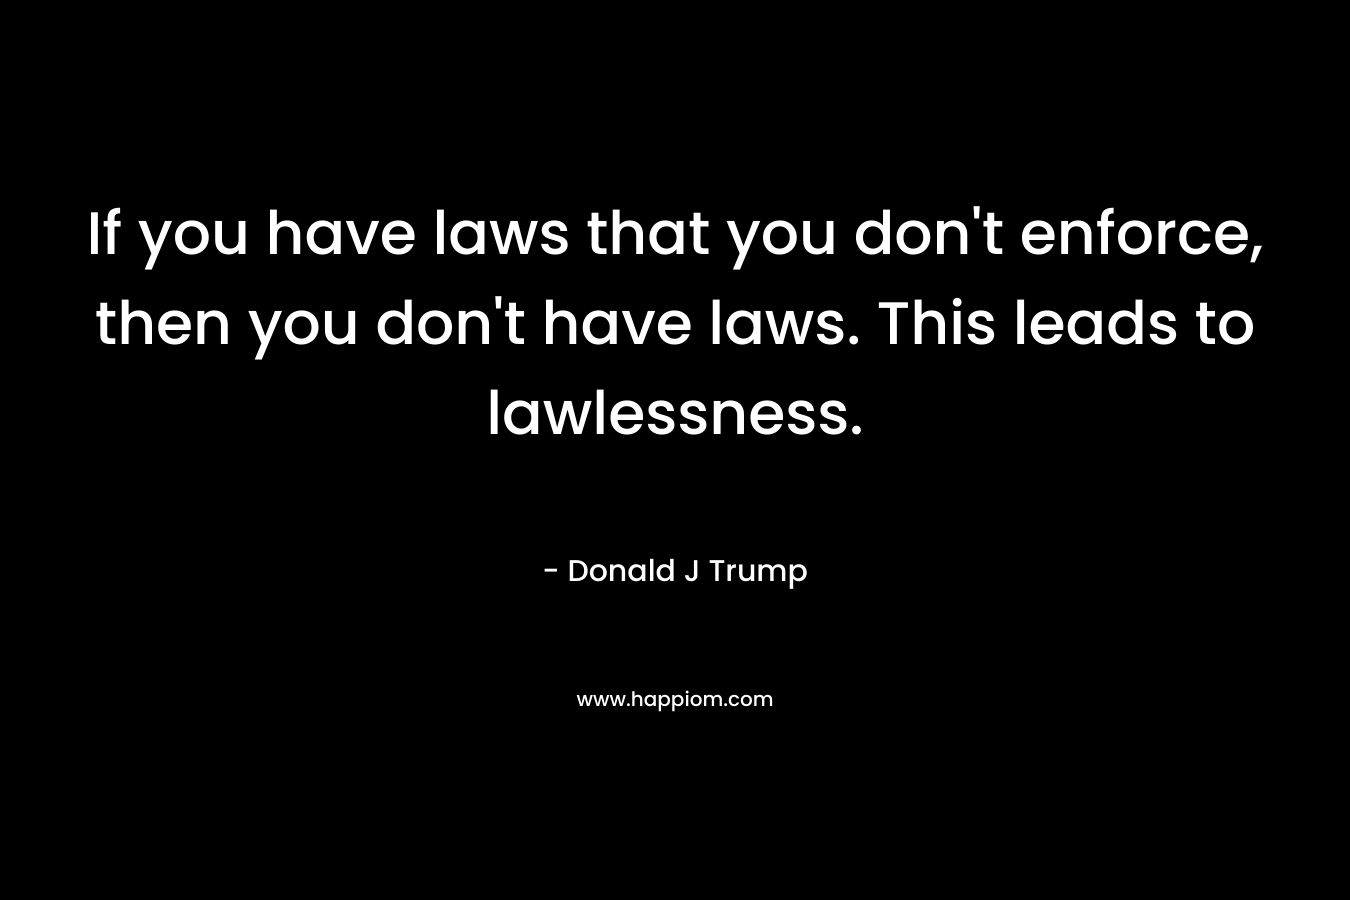 If you have laws that you don't enforce, then you don't have laws. This leads to lawlessness.